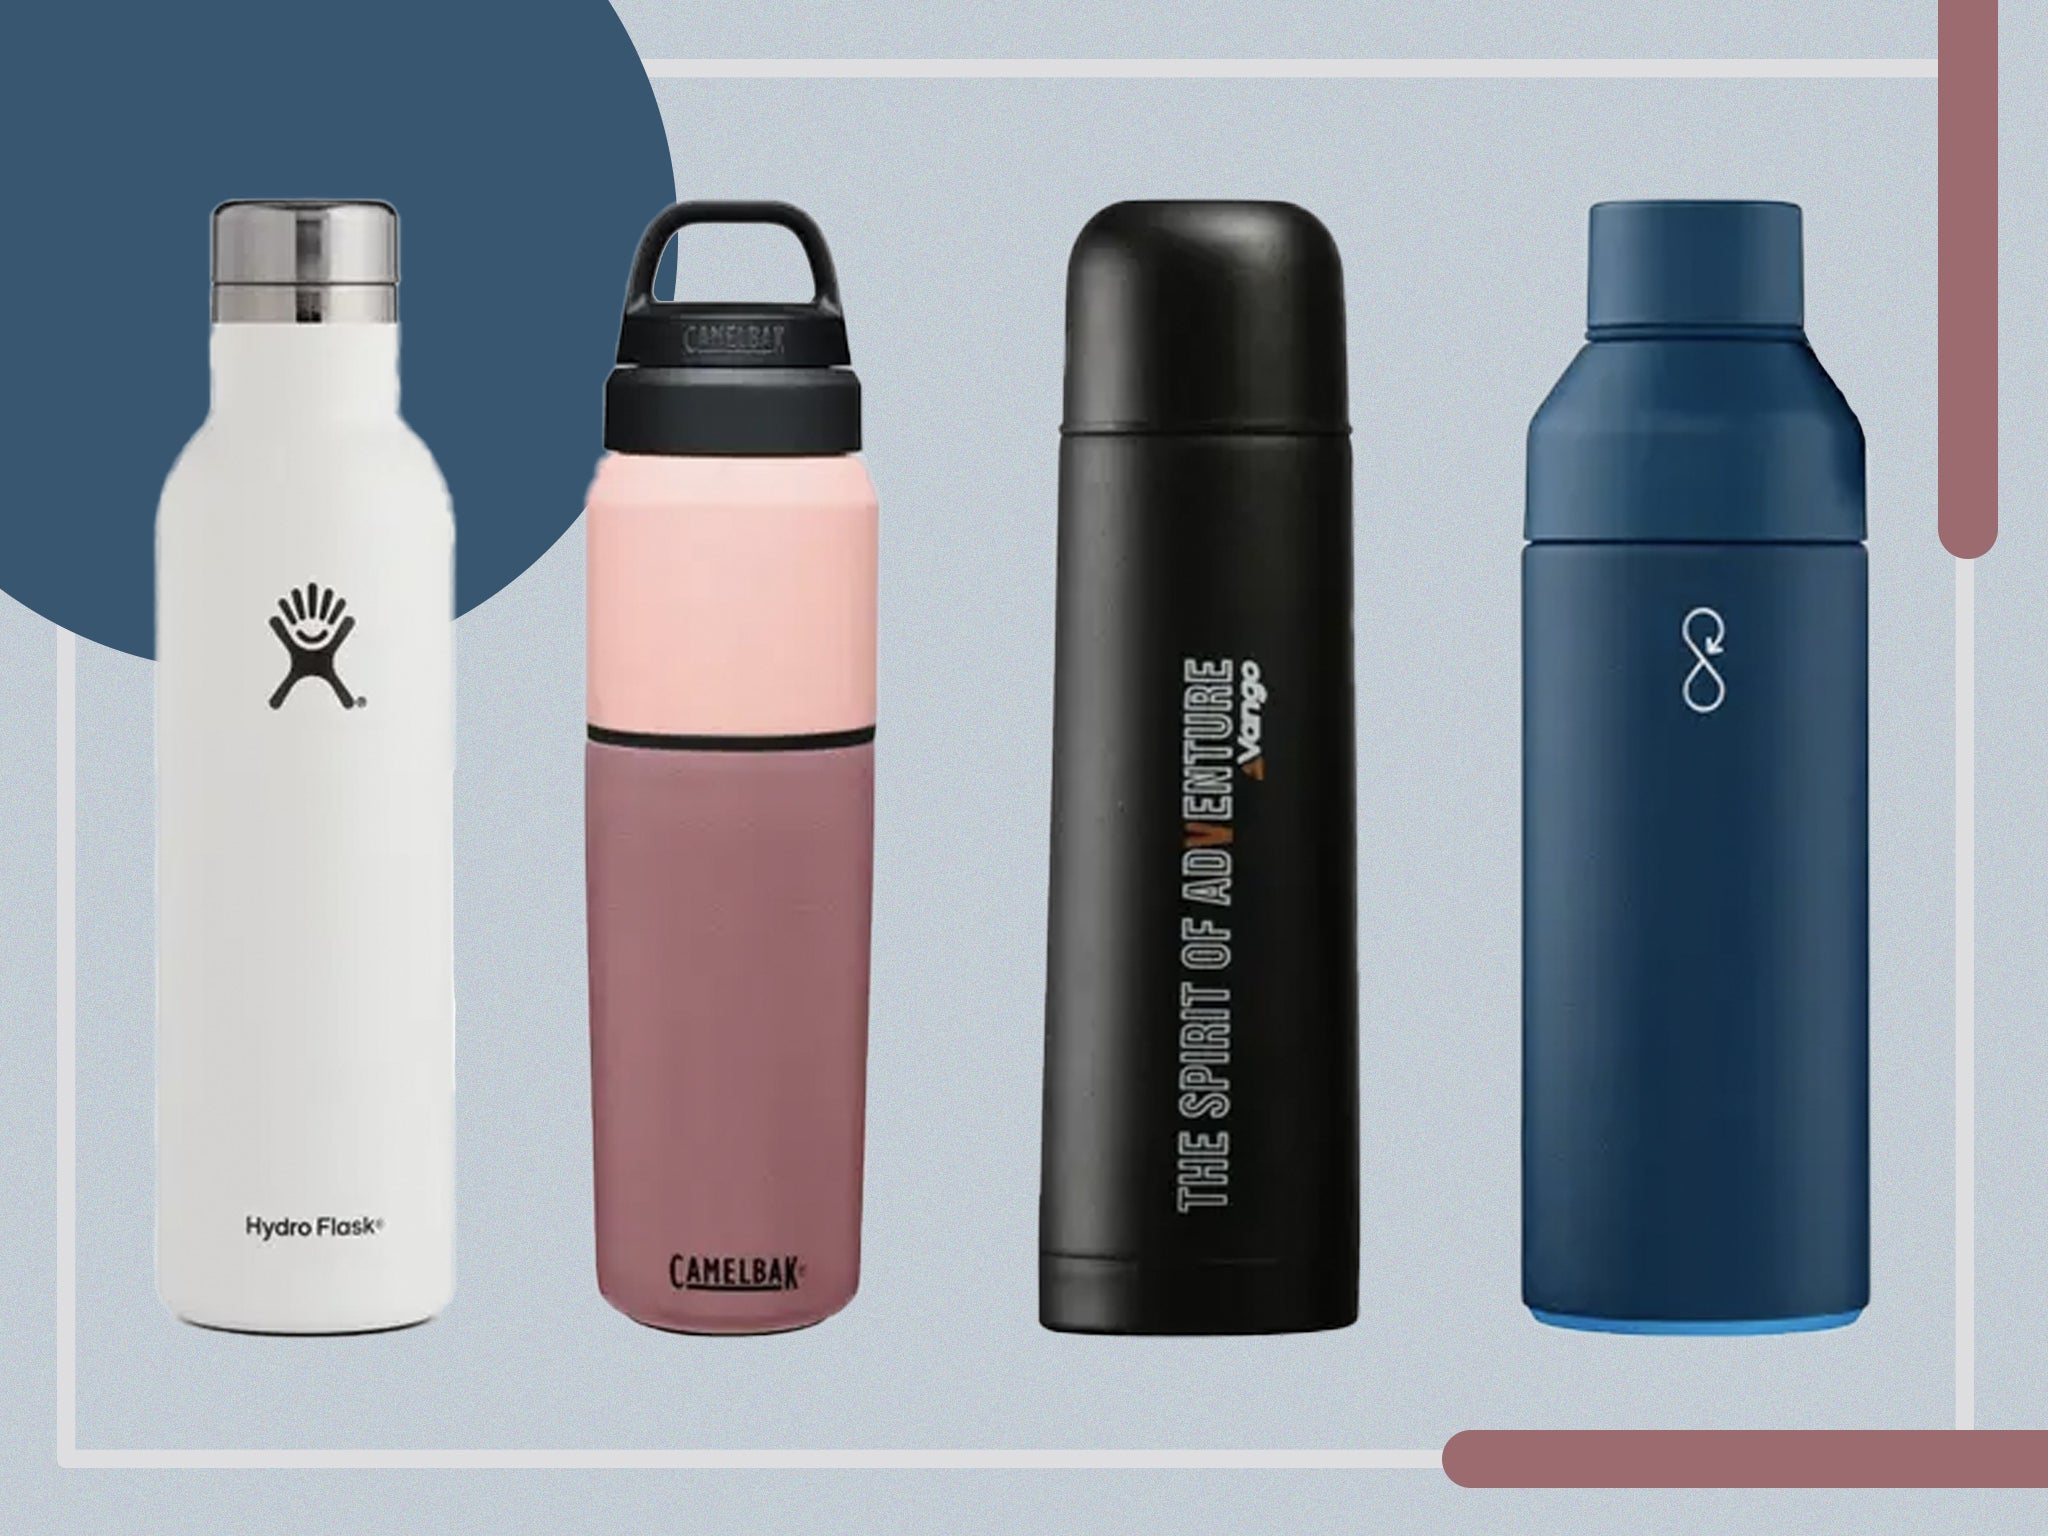 1-L vacuum flask Cofee/Tea/Drink thermos bottle Hot/Cold Travelling Hiking Camp 